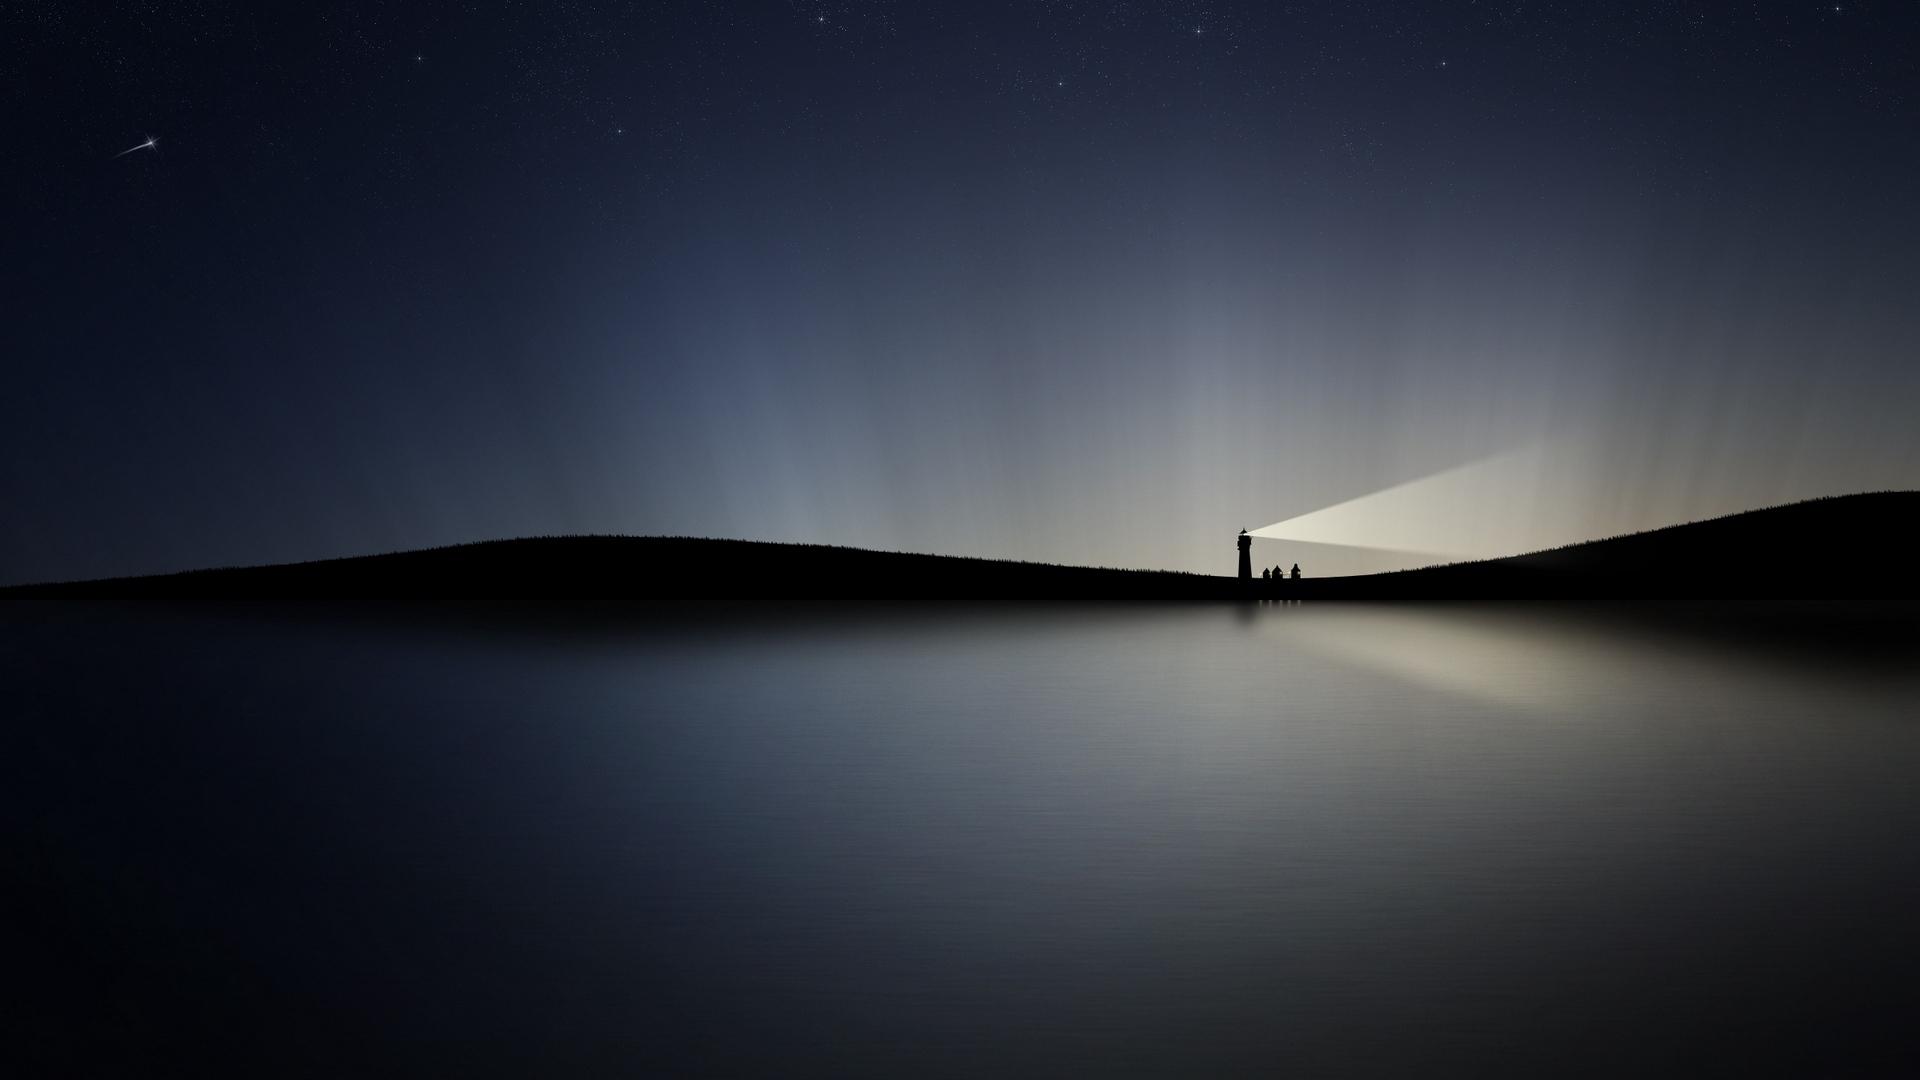 Download wallpaper 1920x1080 night, water, lighthouse